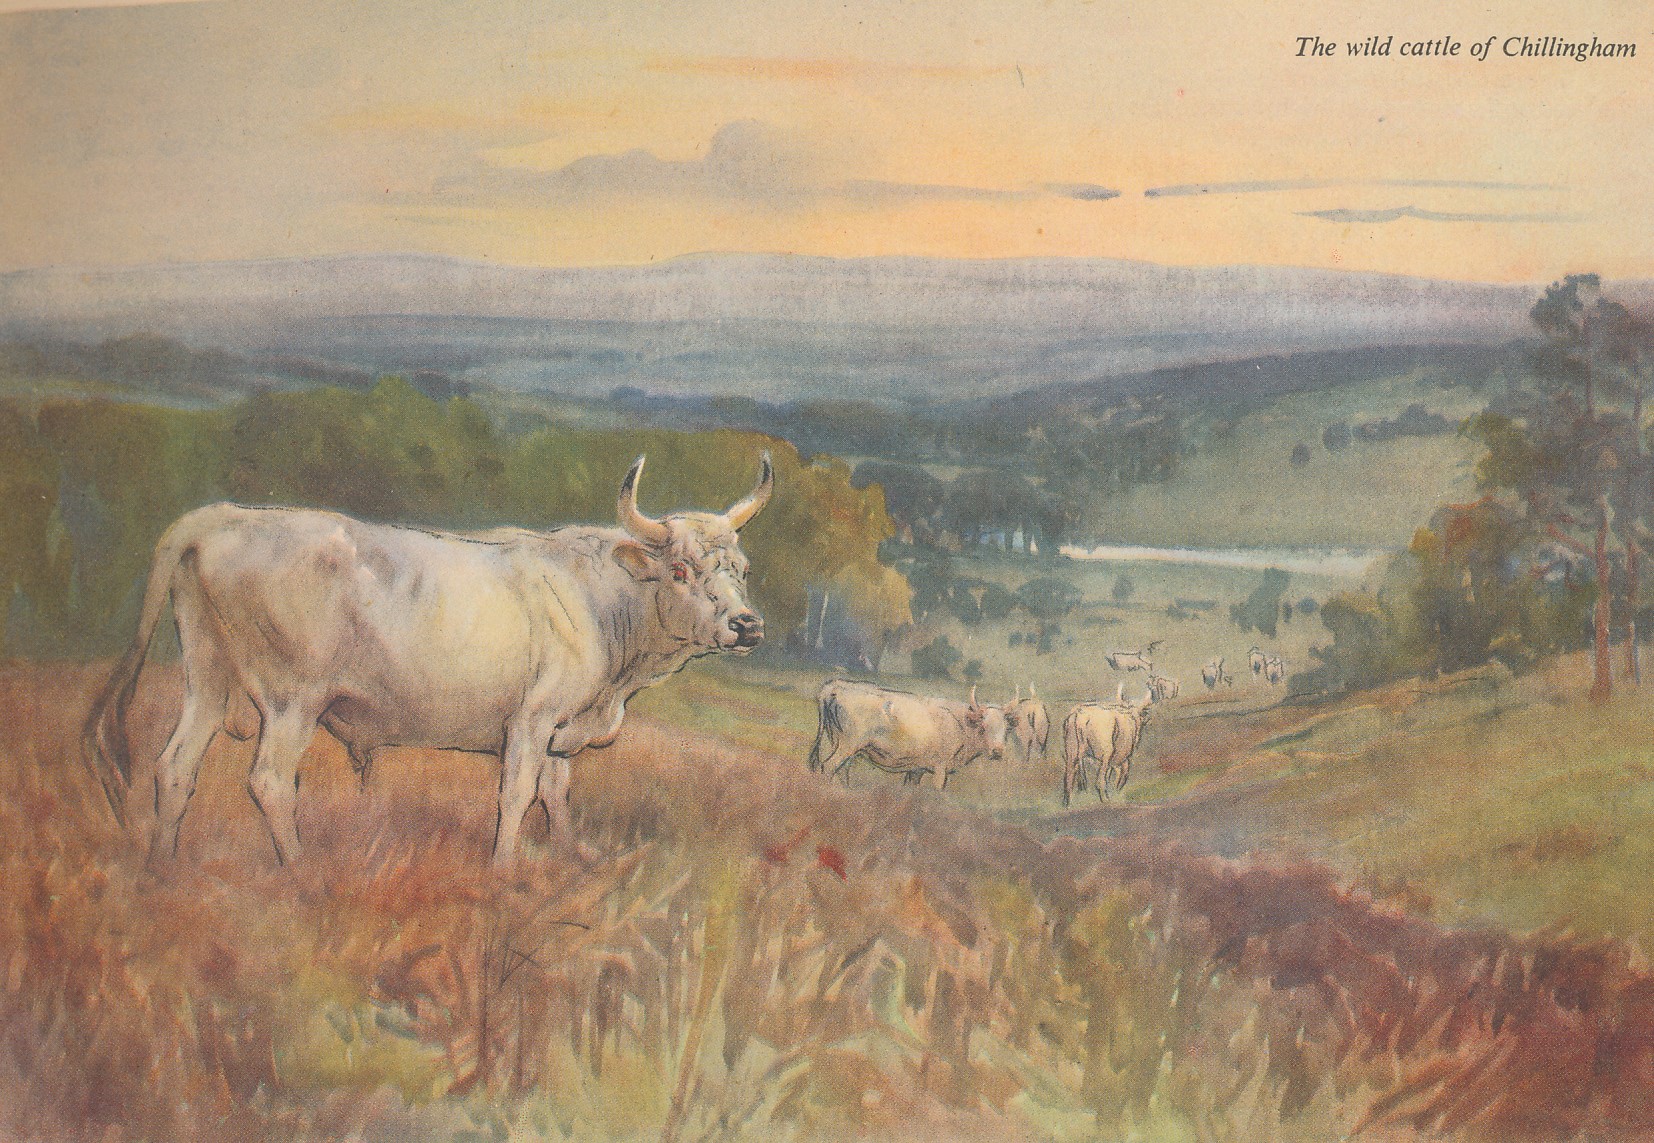 Our Cattle. Puffin Picture Book No. 59.